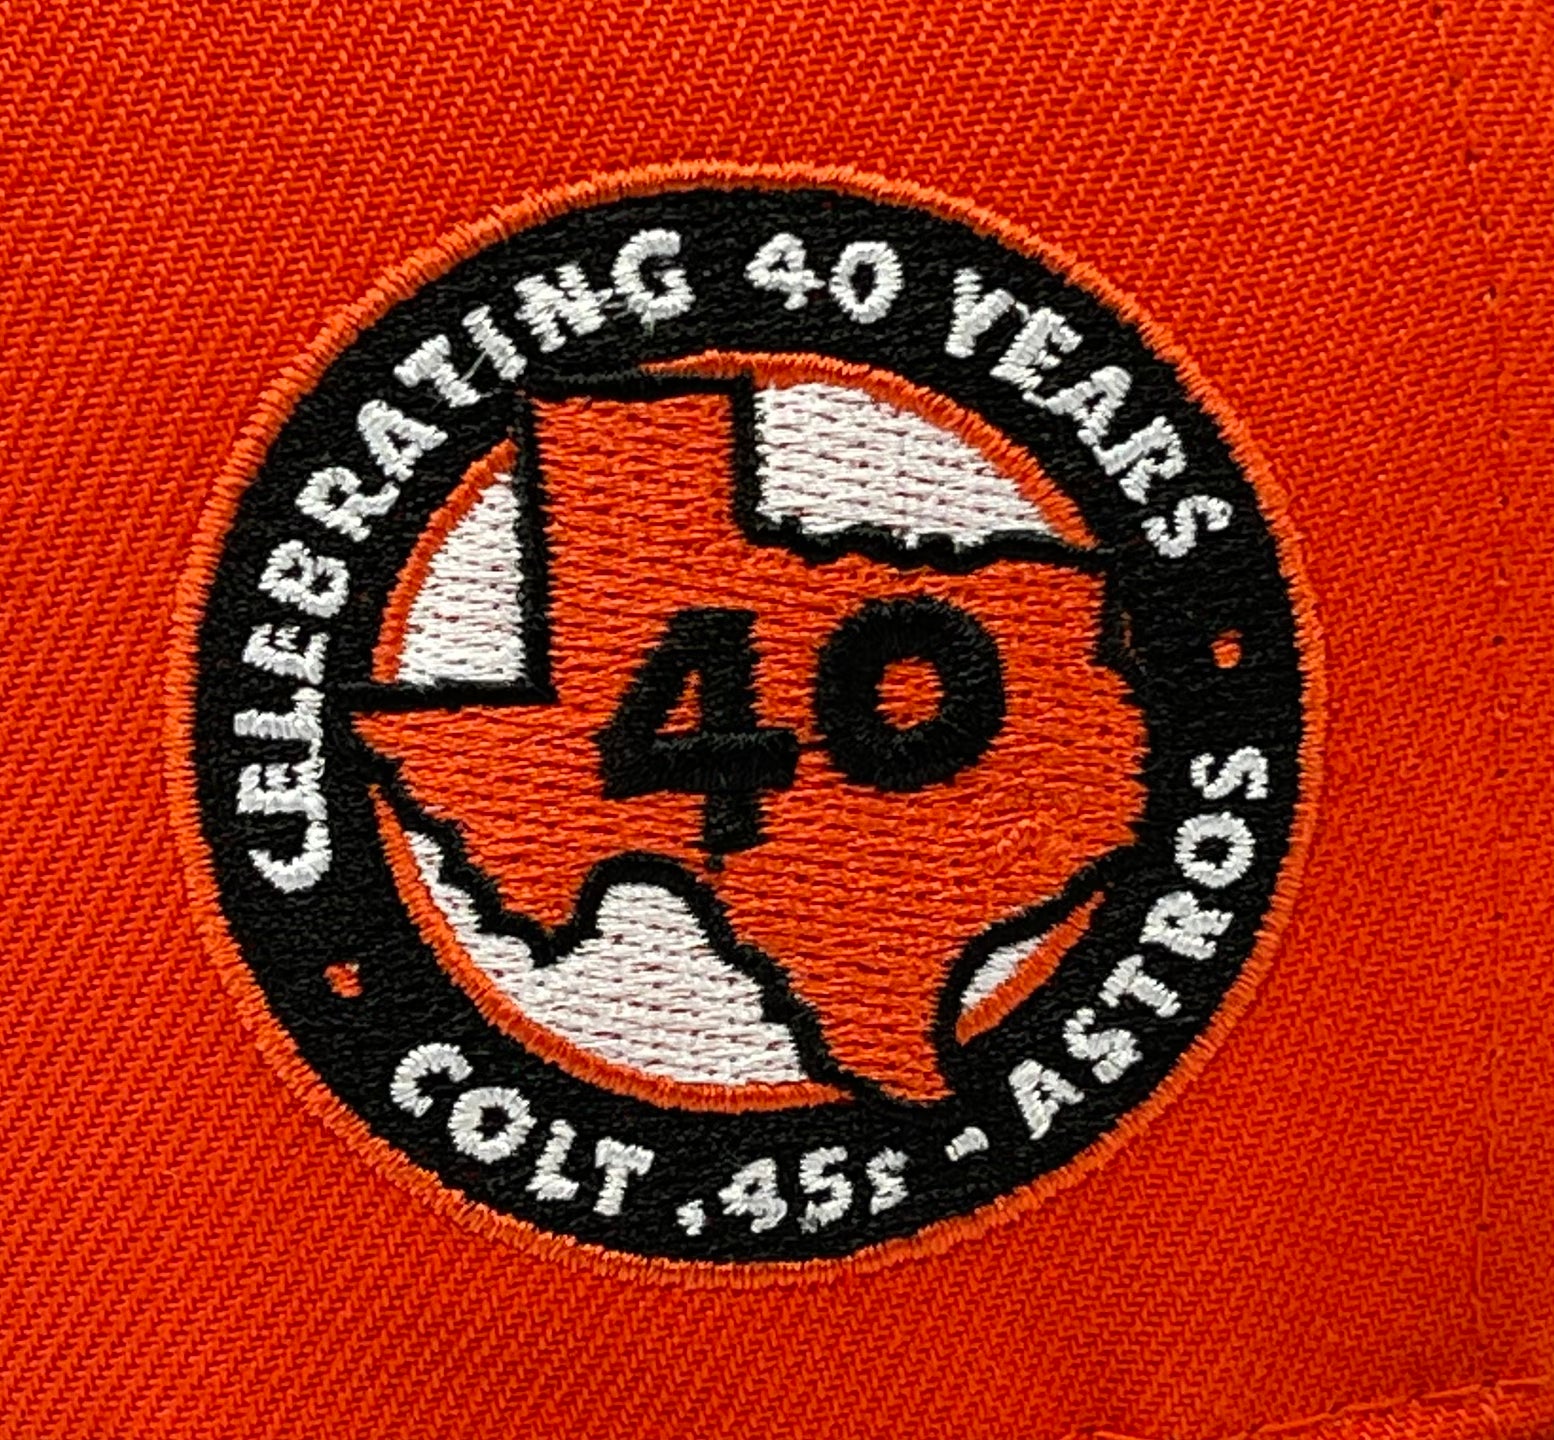 COLT 45'S (ORANGE) (40TH ANNIVERSARY) NEW ERA 59FIFTY FITTED